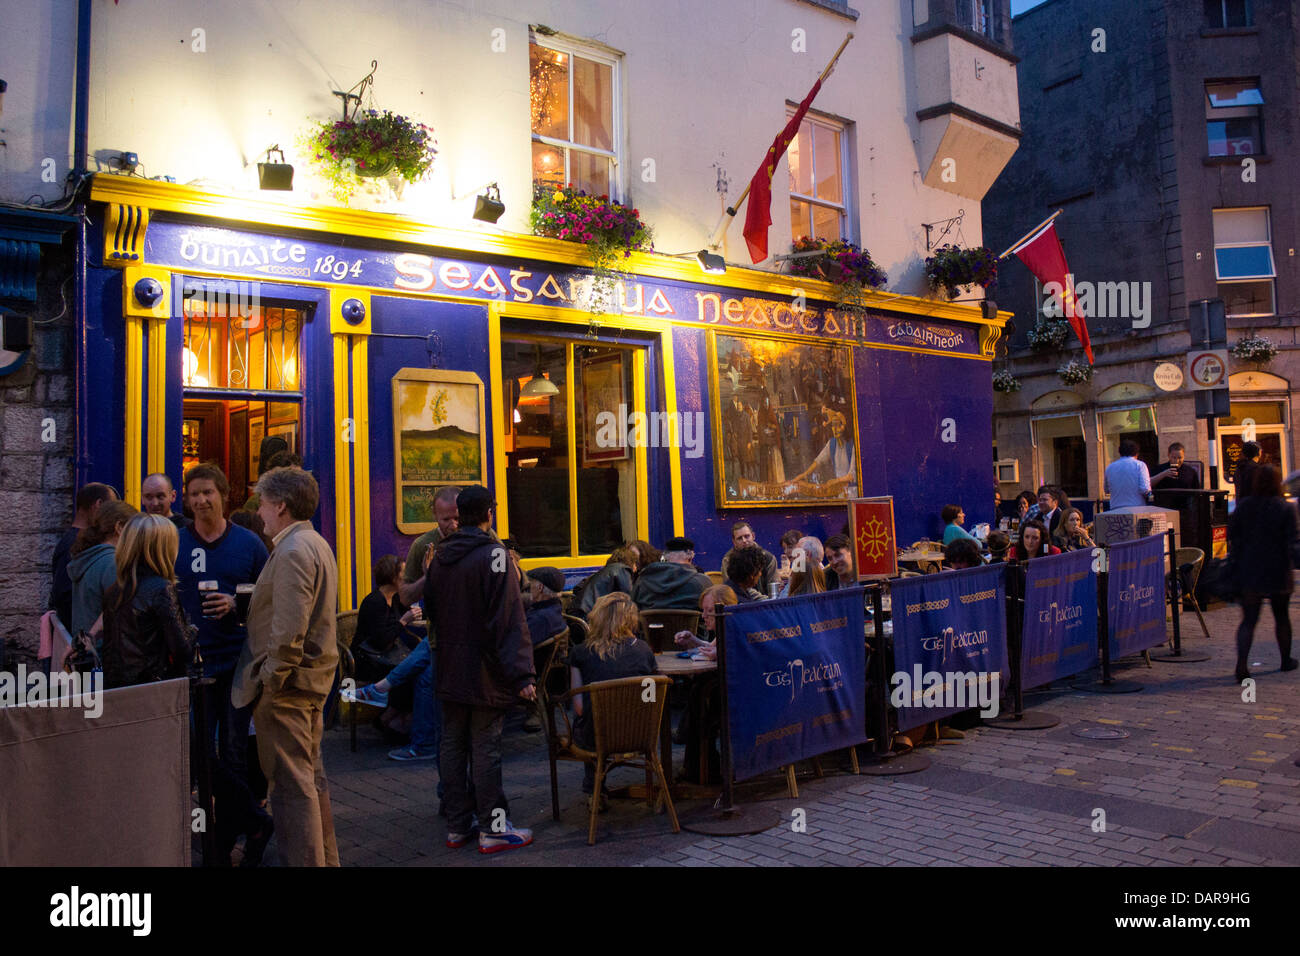 Seatan Ua Neachtain O'Naughton's Bar with people outside drinking and chatting at night Quay Street Galway Republic of Ireland Stock Photo